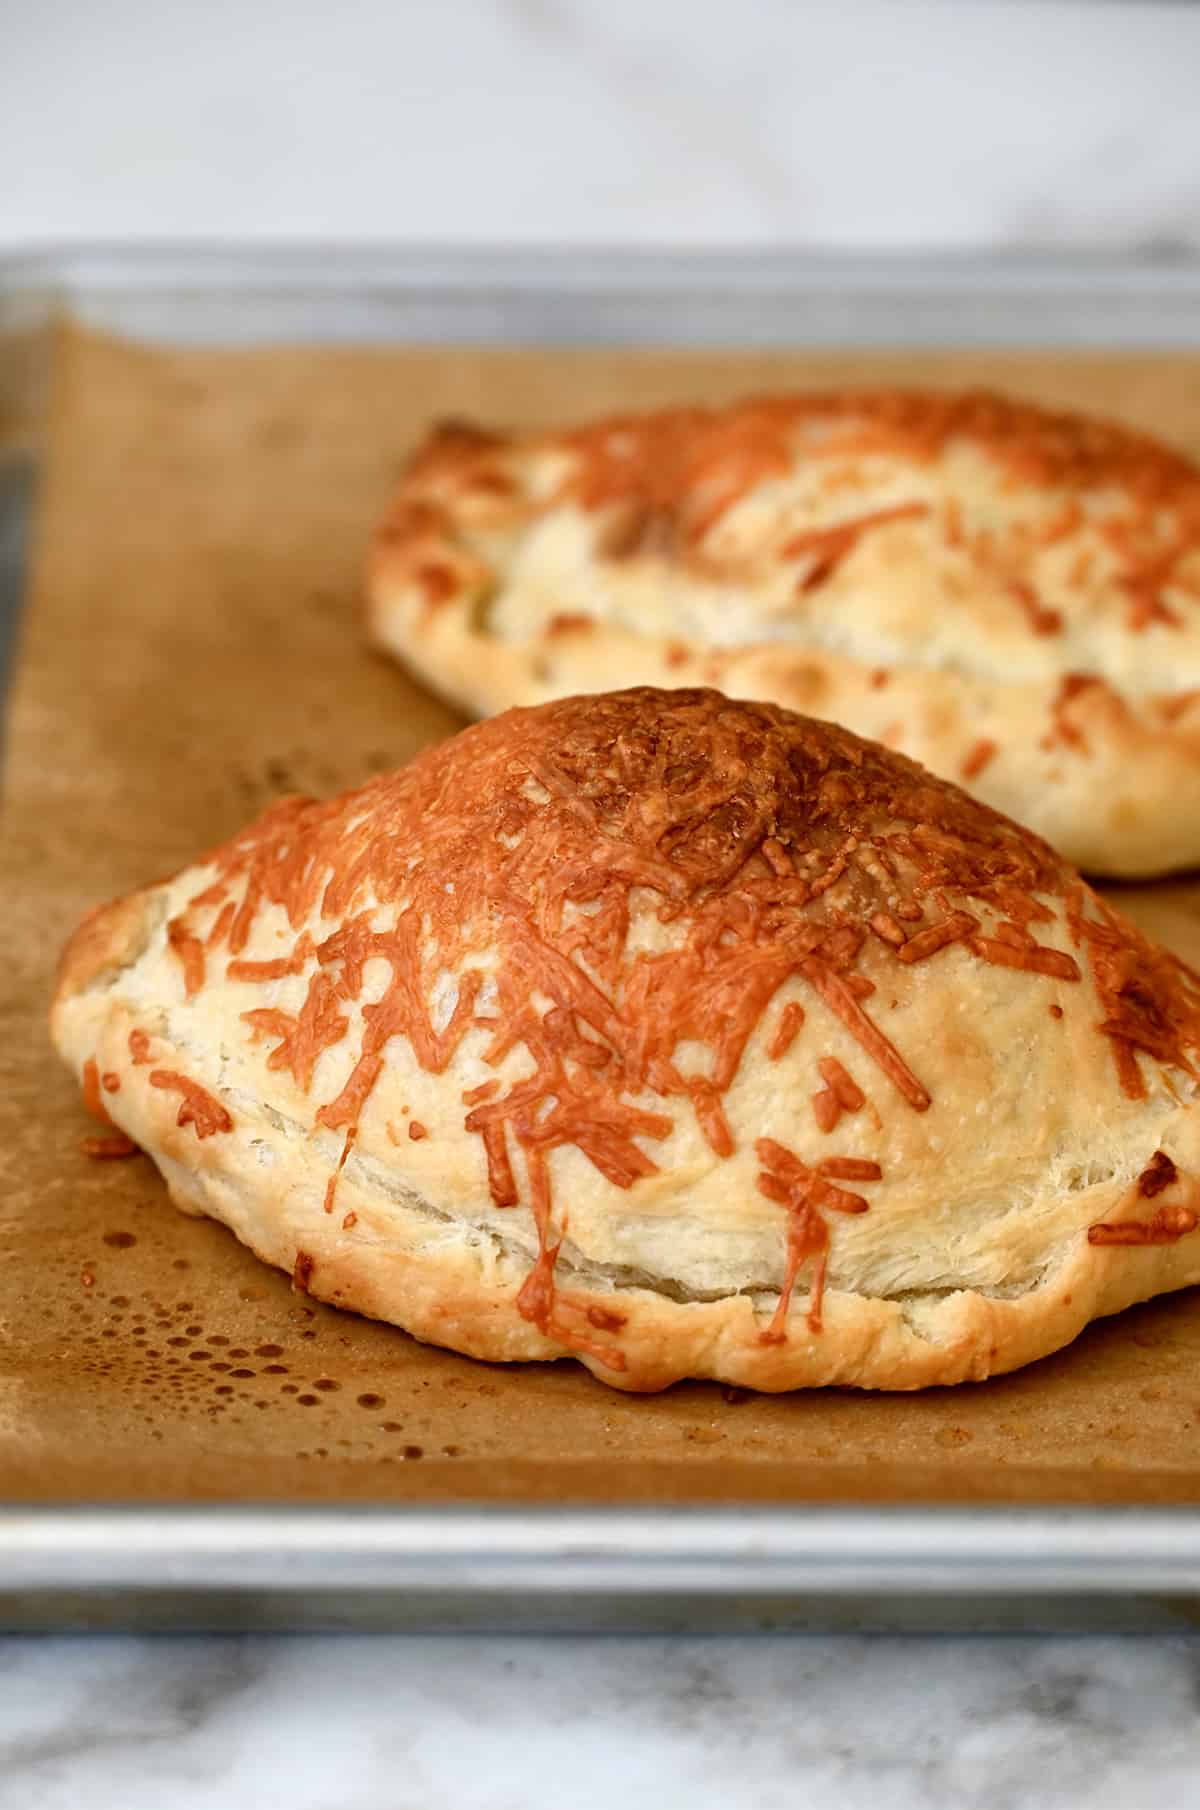 Golden, crispy calzones topped with melted Parmesan cheese on a parchment paper-lined baking sheet.